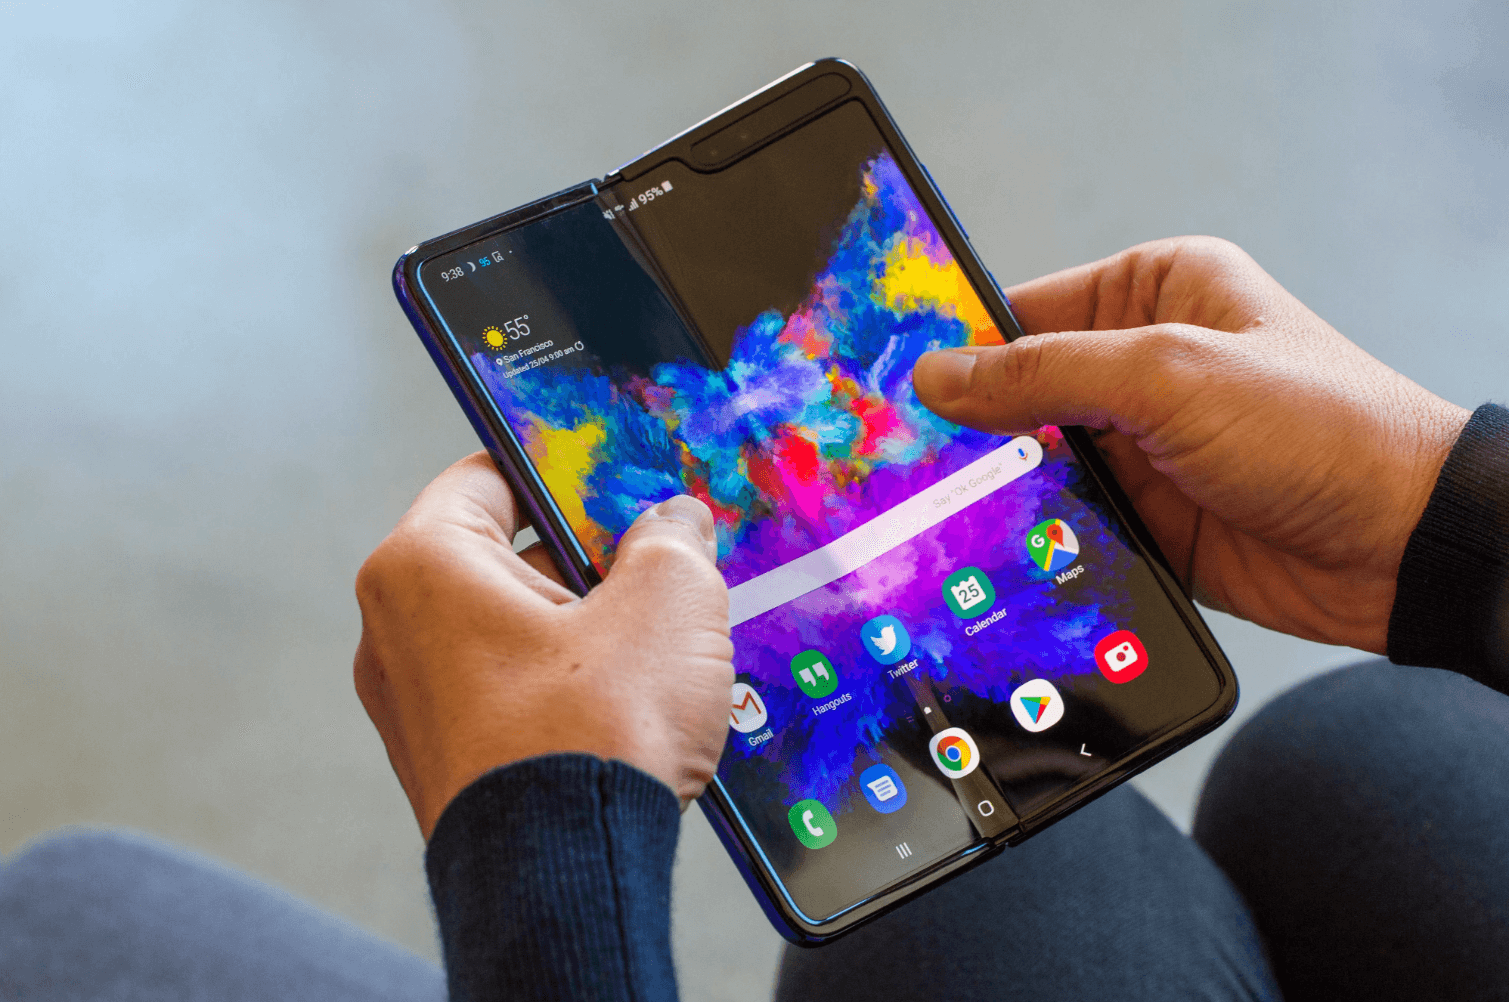 Galaxy Fold finally hits stores in the US this week